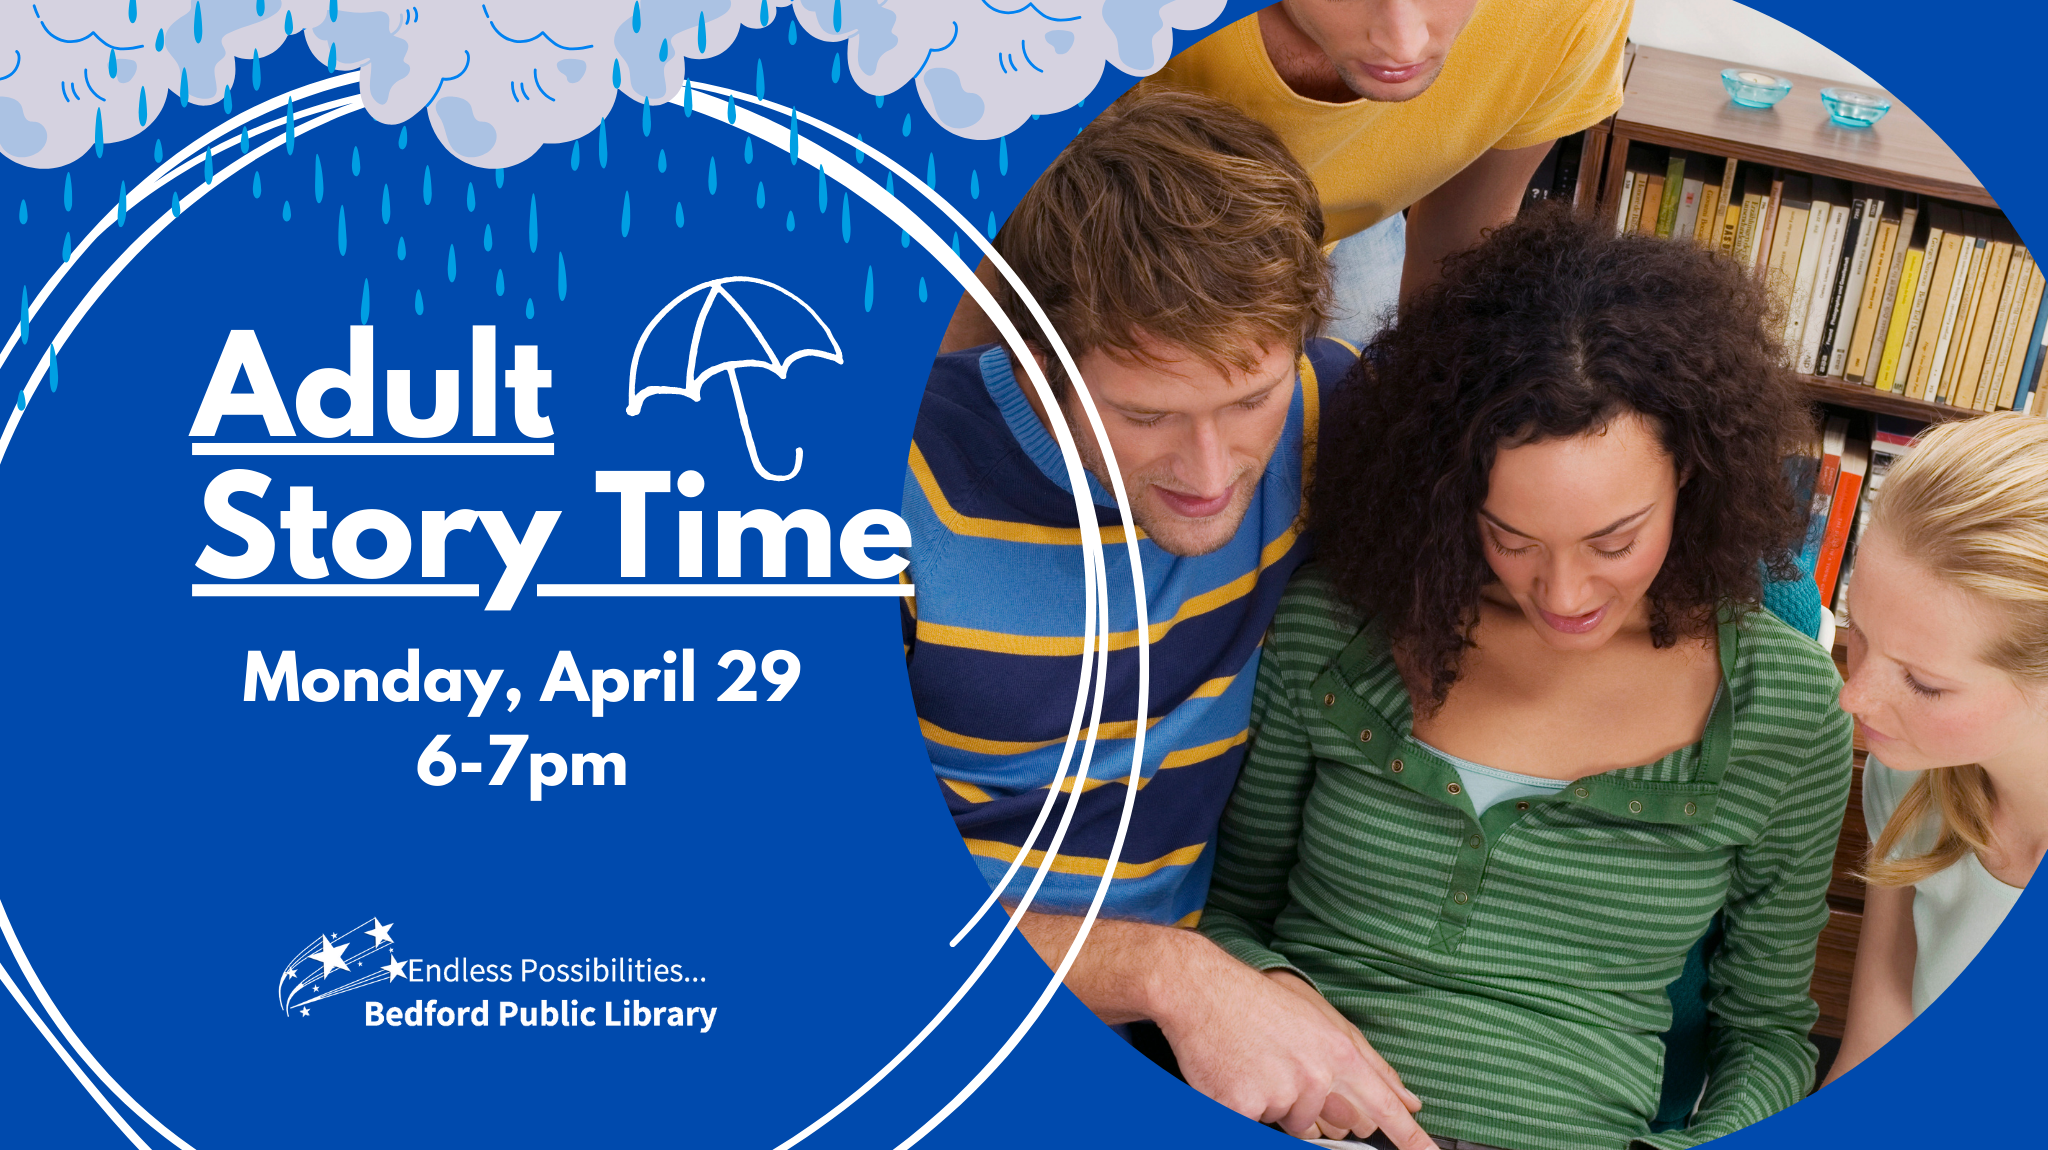 Adult Story Time on April 29 at 6pm